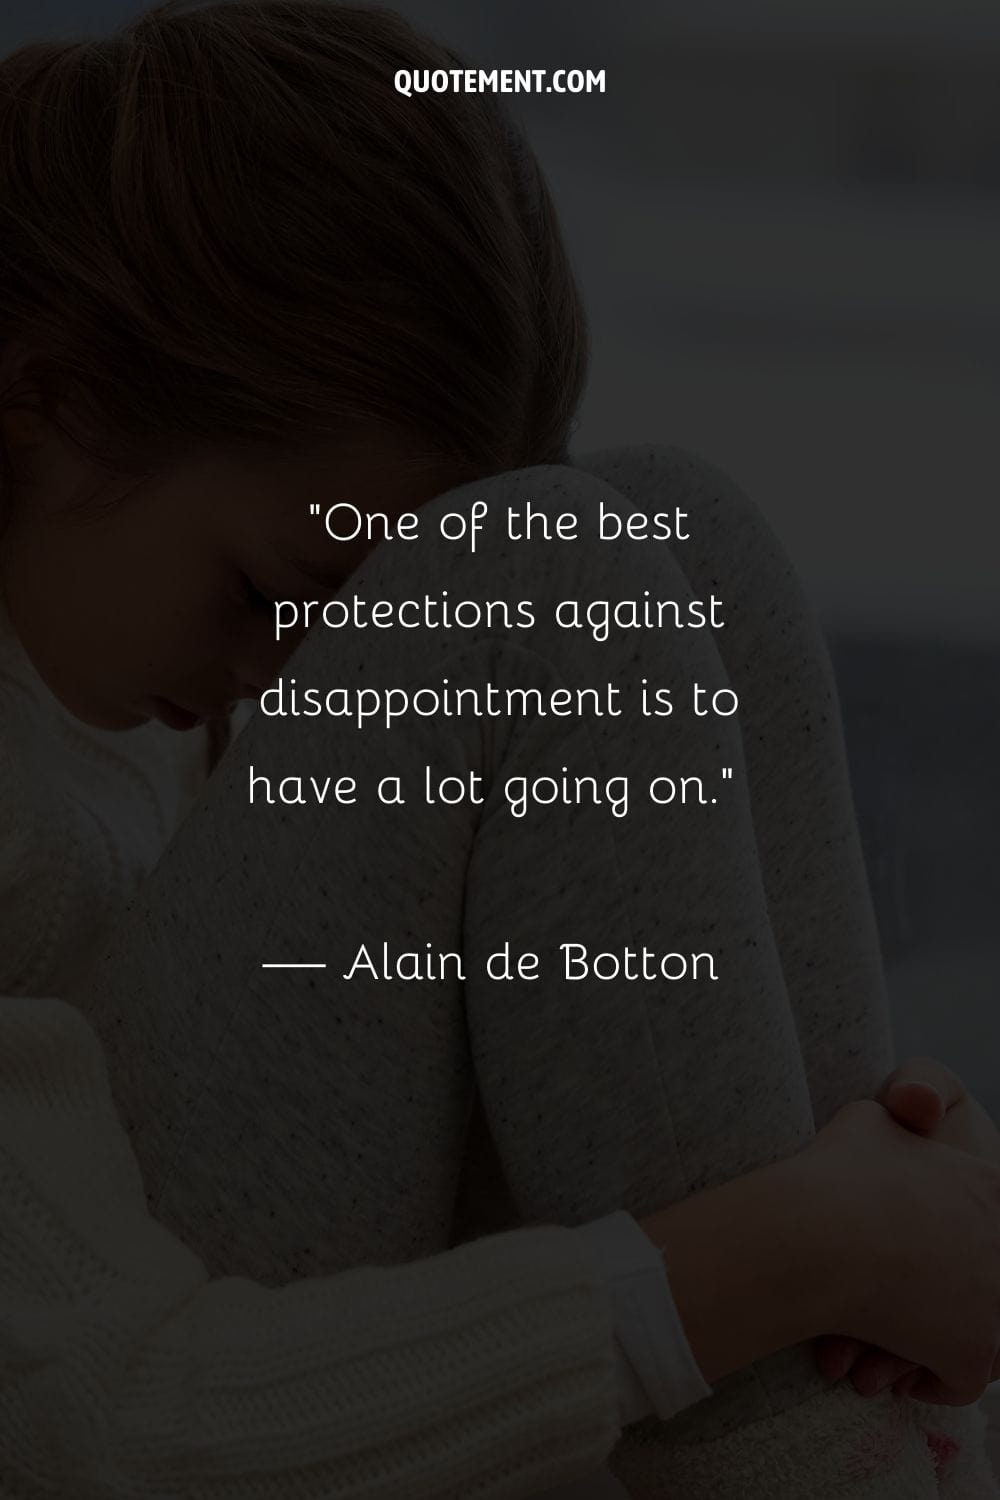 One of the best protections against disappointment is to have a lot going on